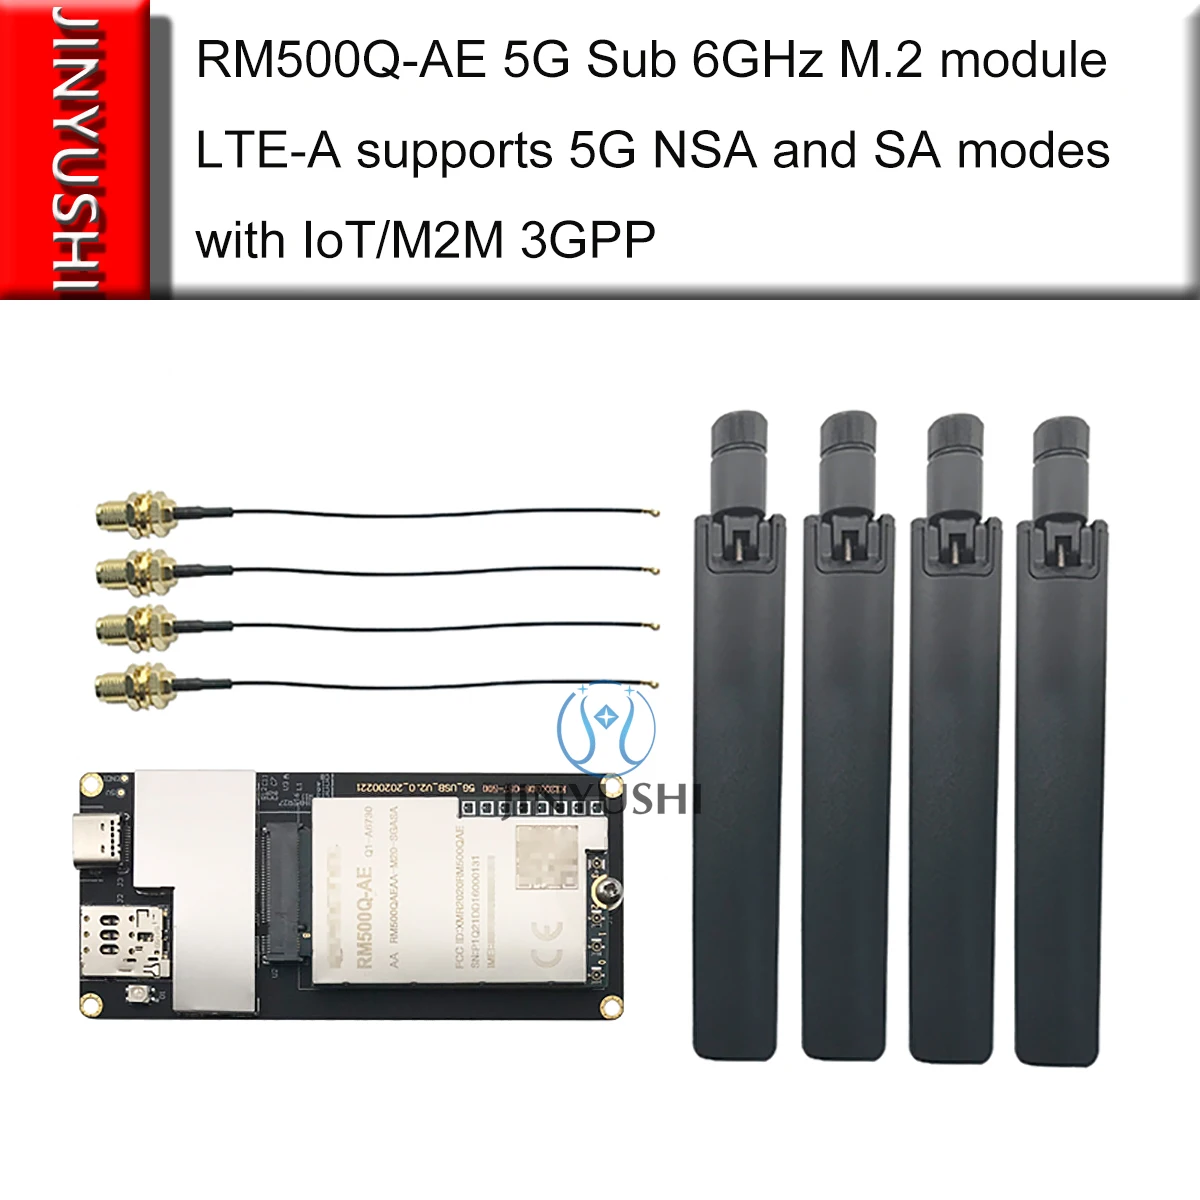 

IN STOCK RM500Q-AE 5G Sub 6GHz M.2 module LTE-A supports 5G NSA and SA modes with IoT/M2M 3GPP Replace EM20-G EM160R-GL EM12-G